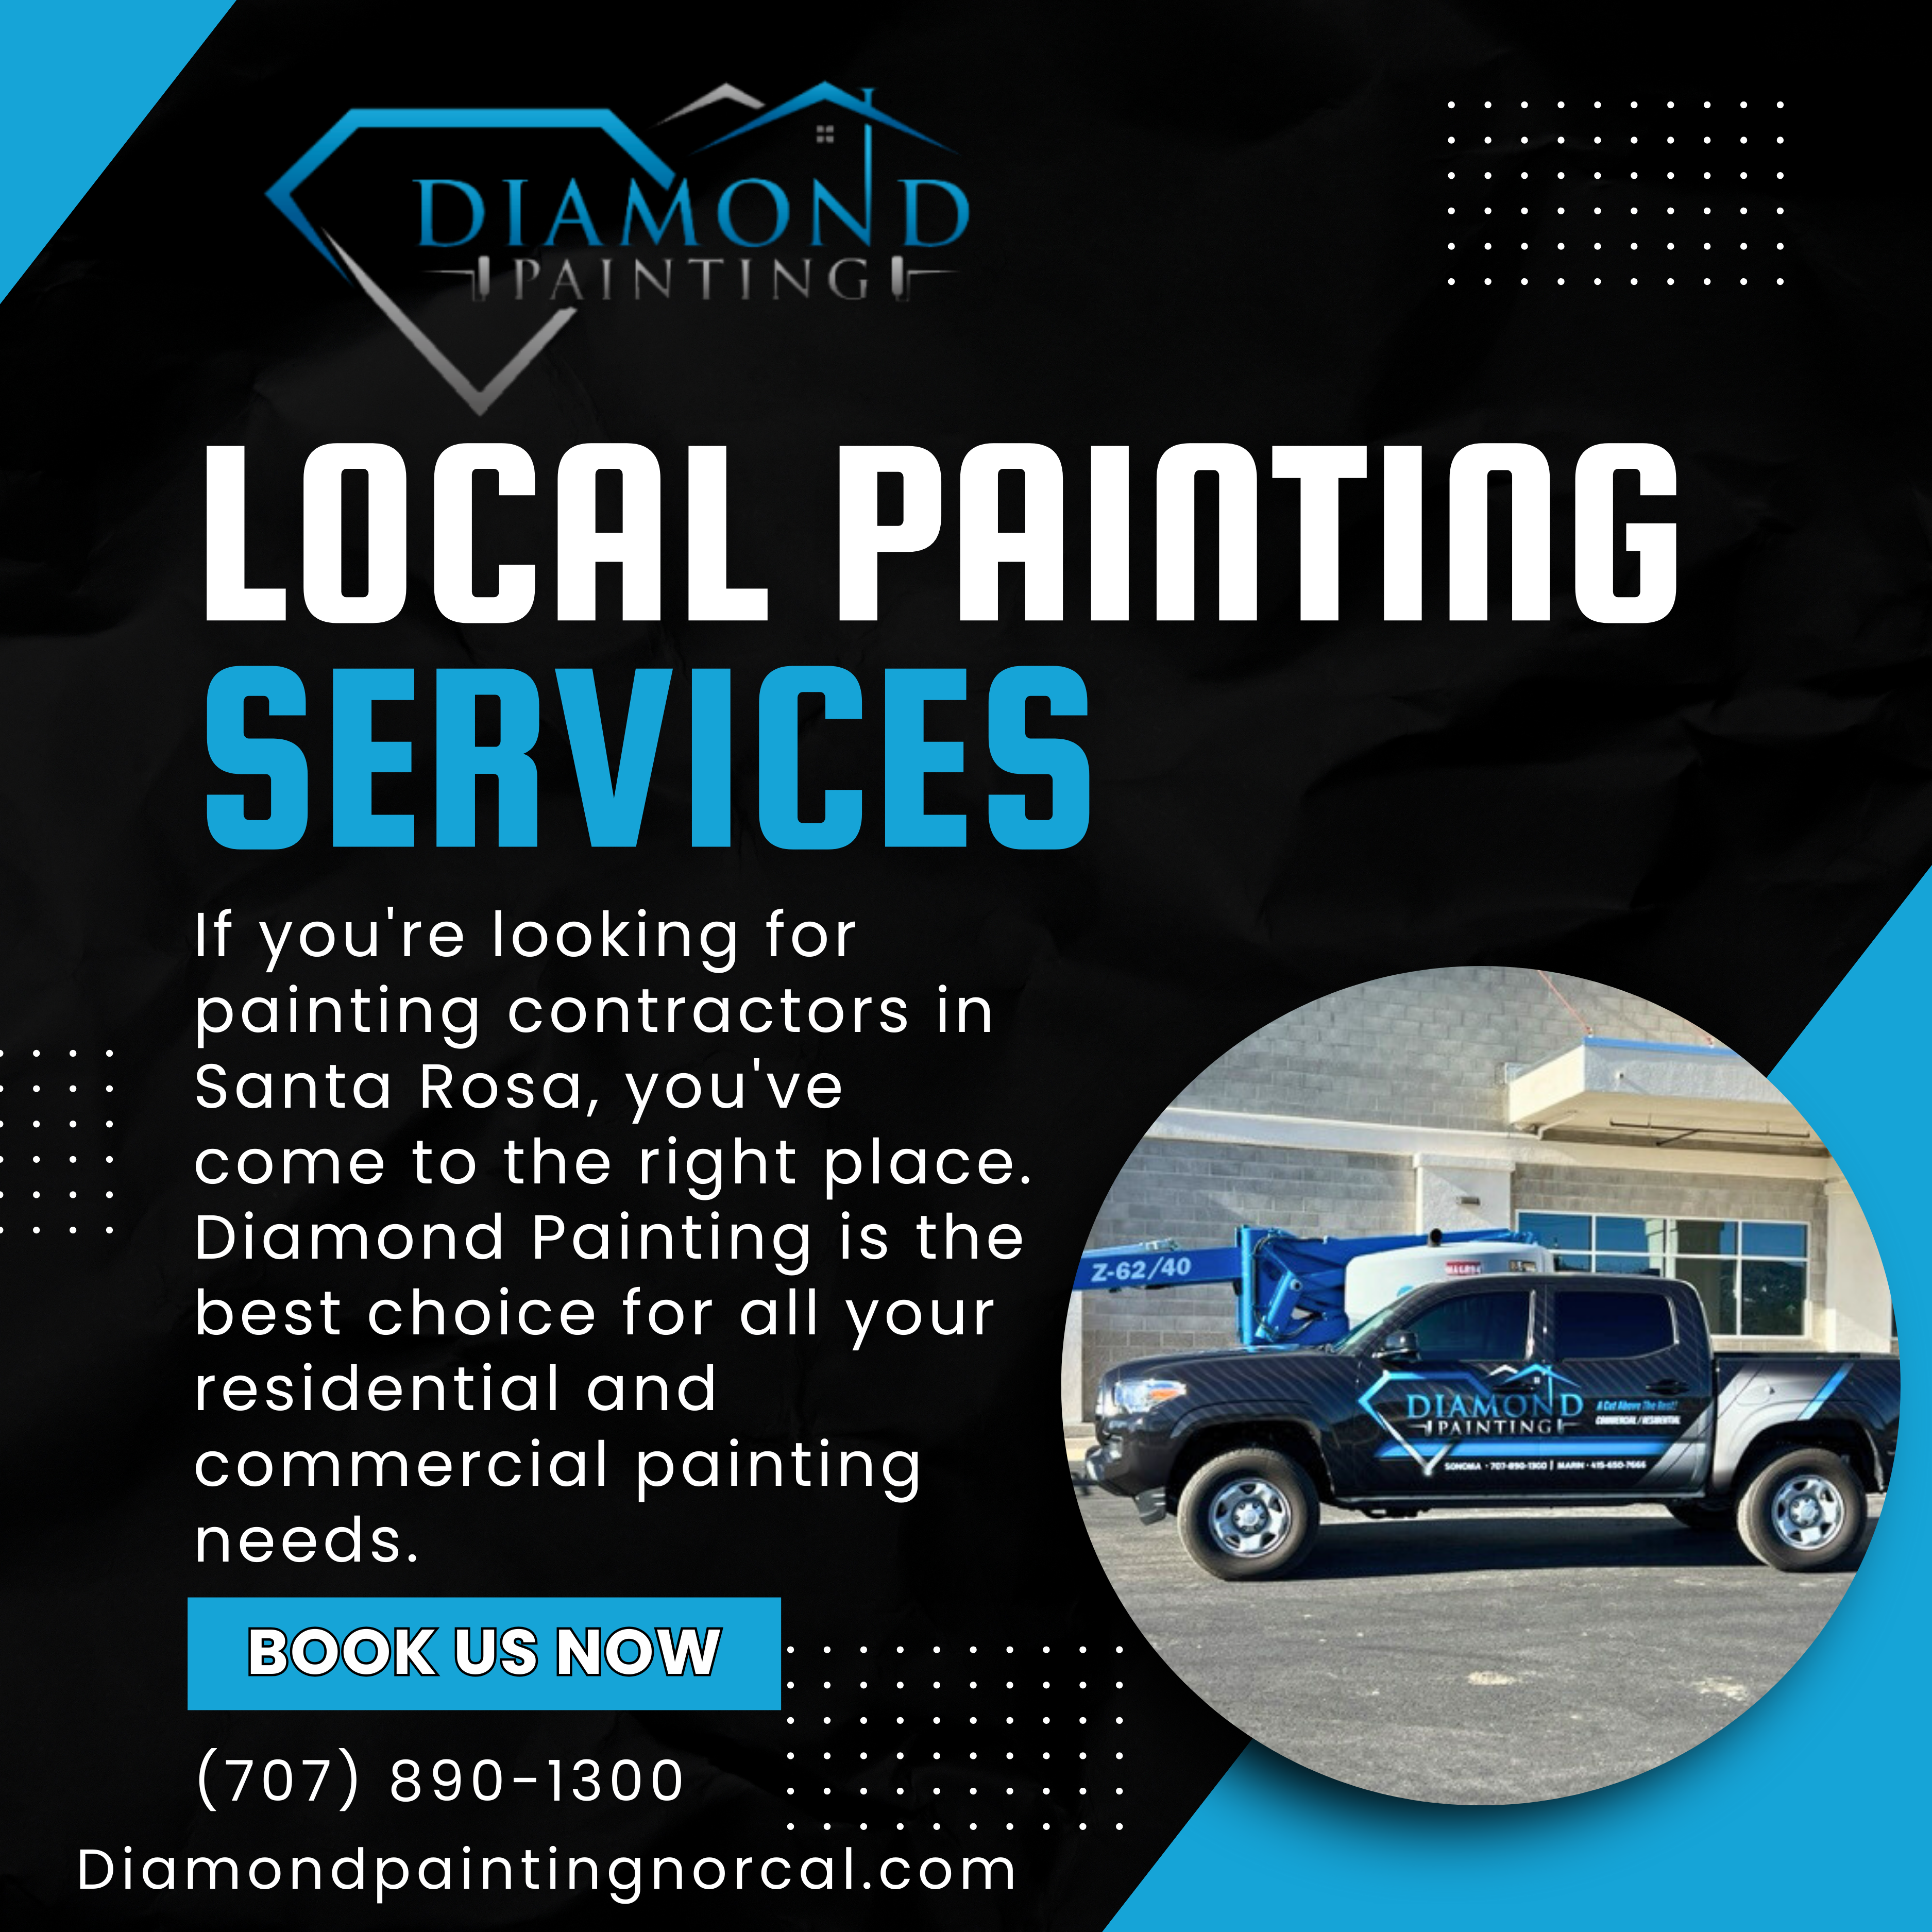 Skilled painting contractors in Santa Rosa